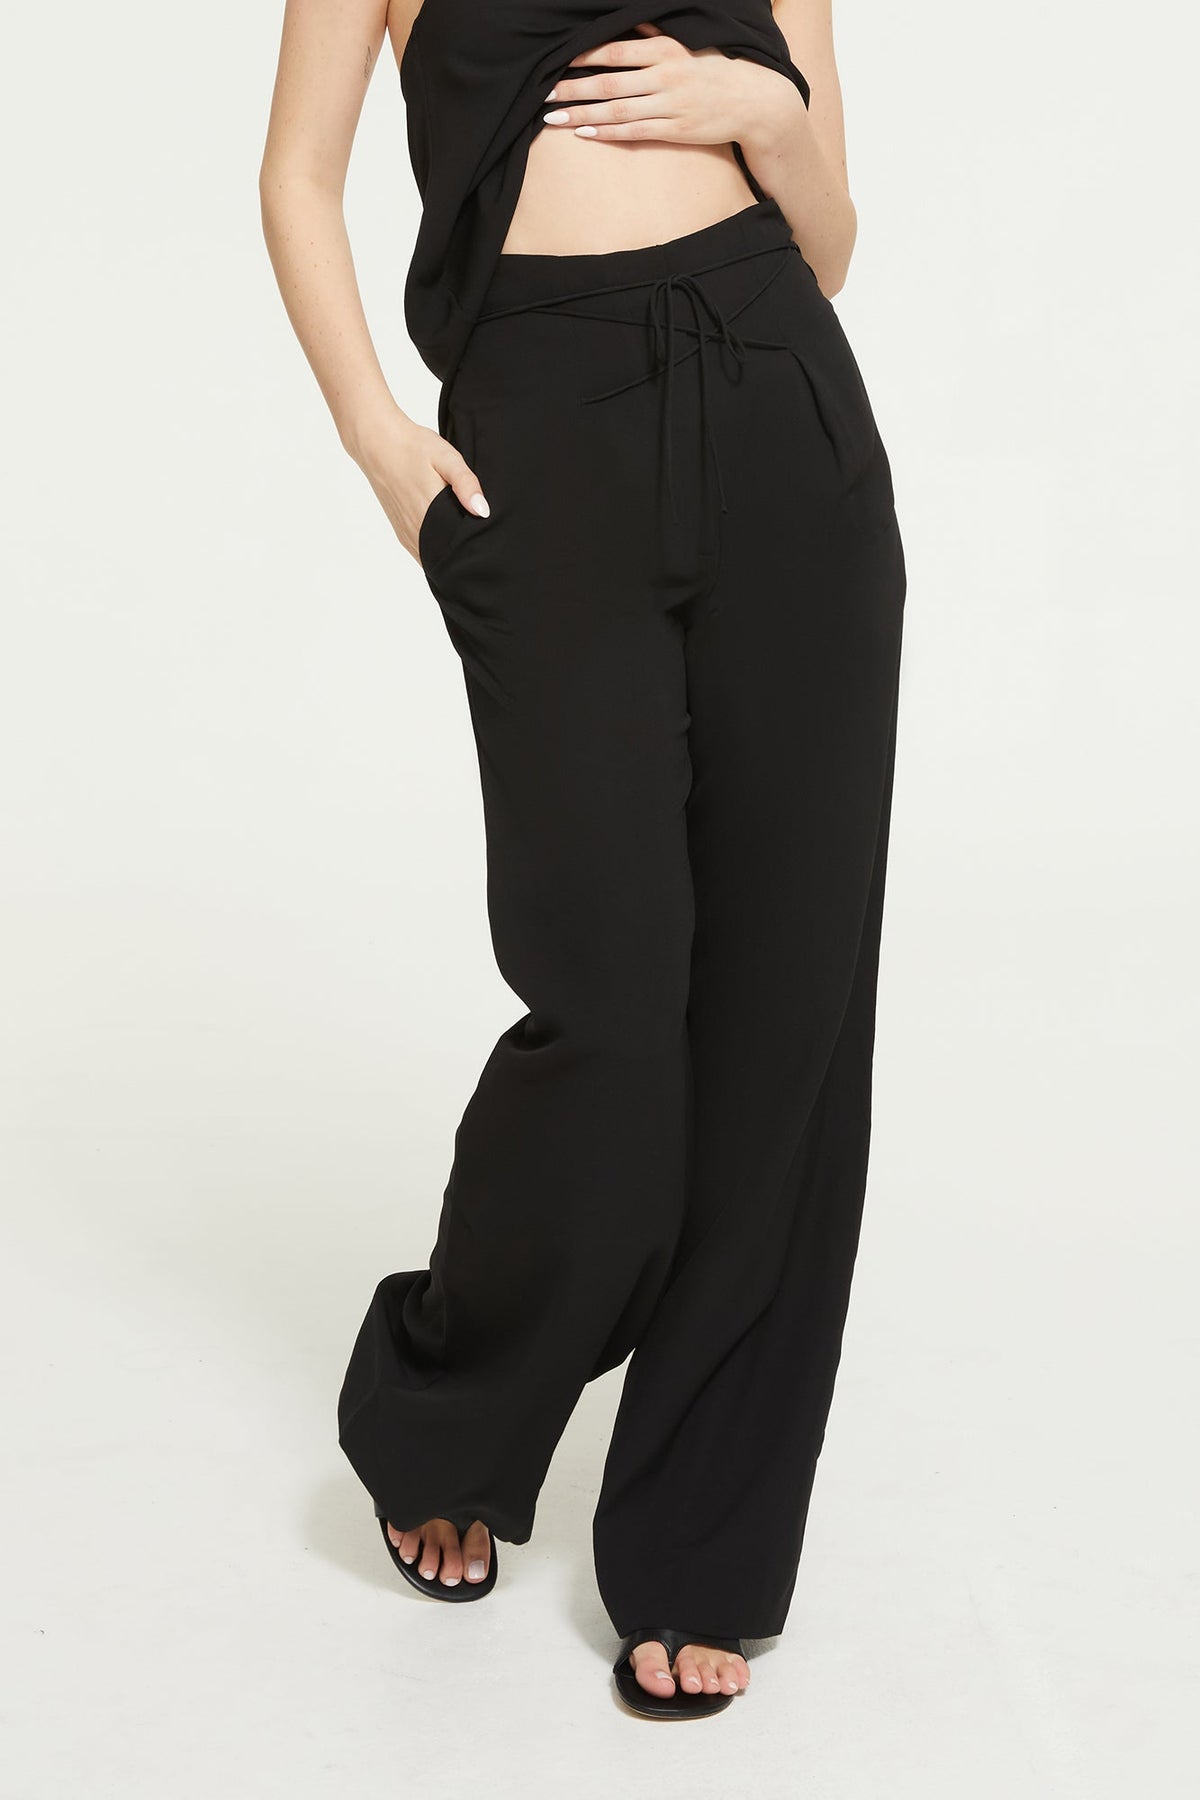 The Samba Pants in Black by Ginia RTW